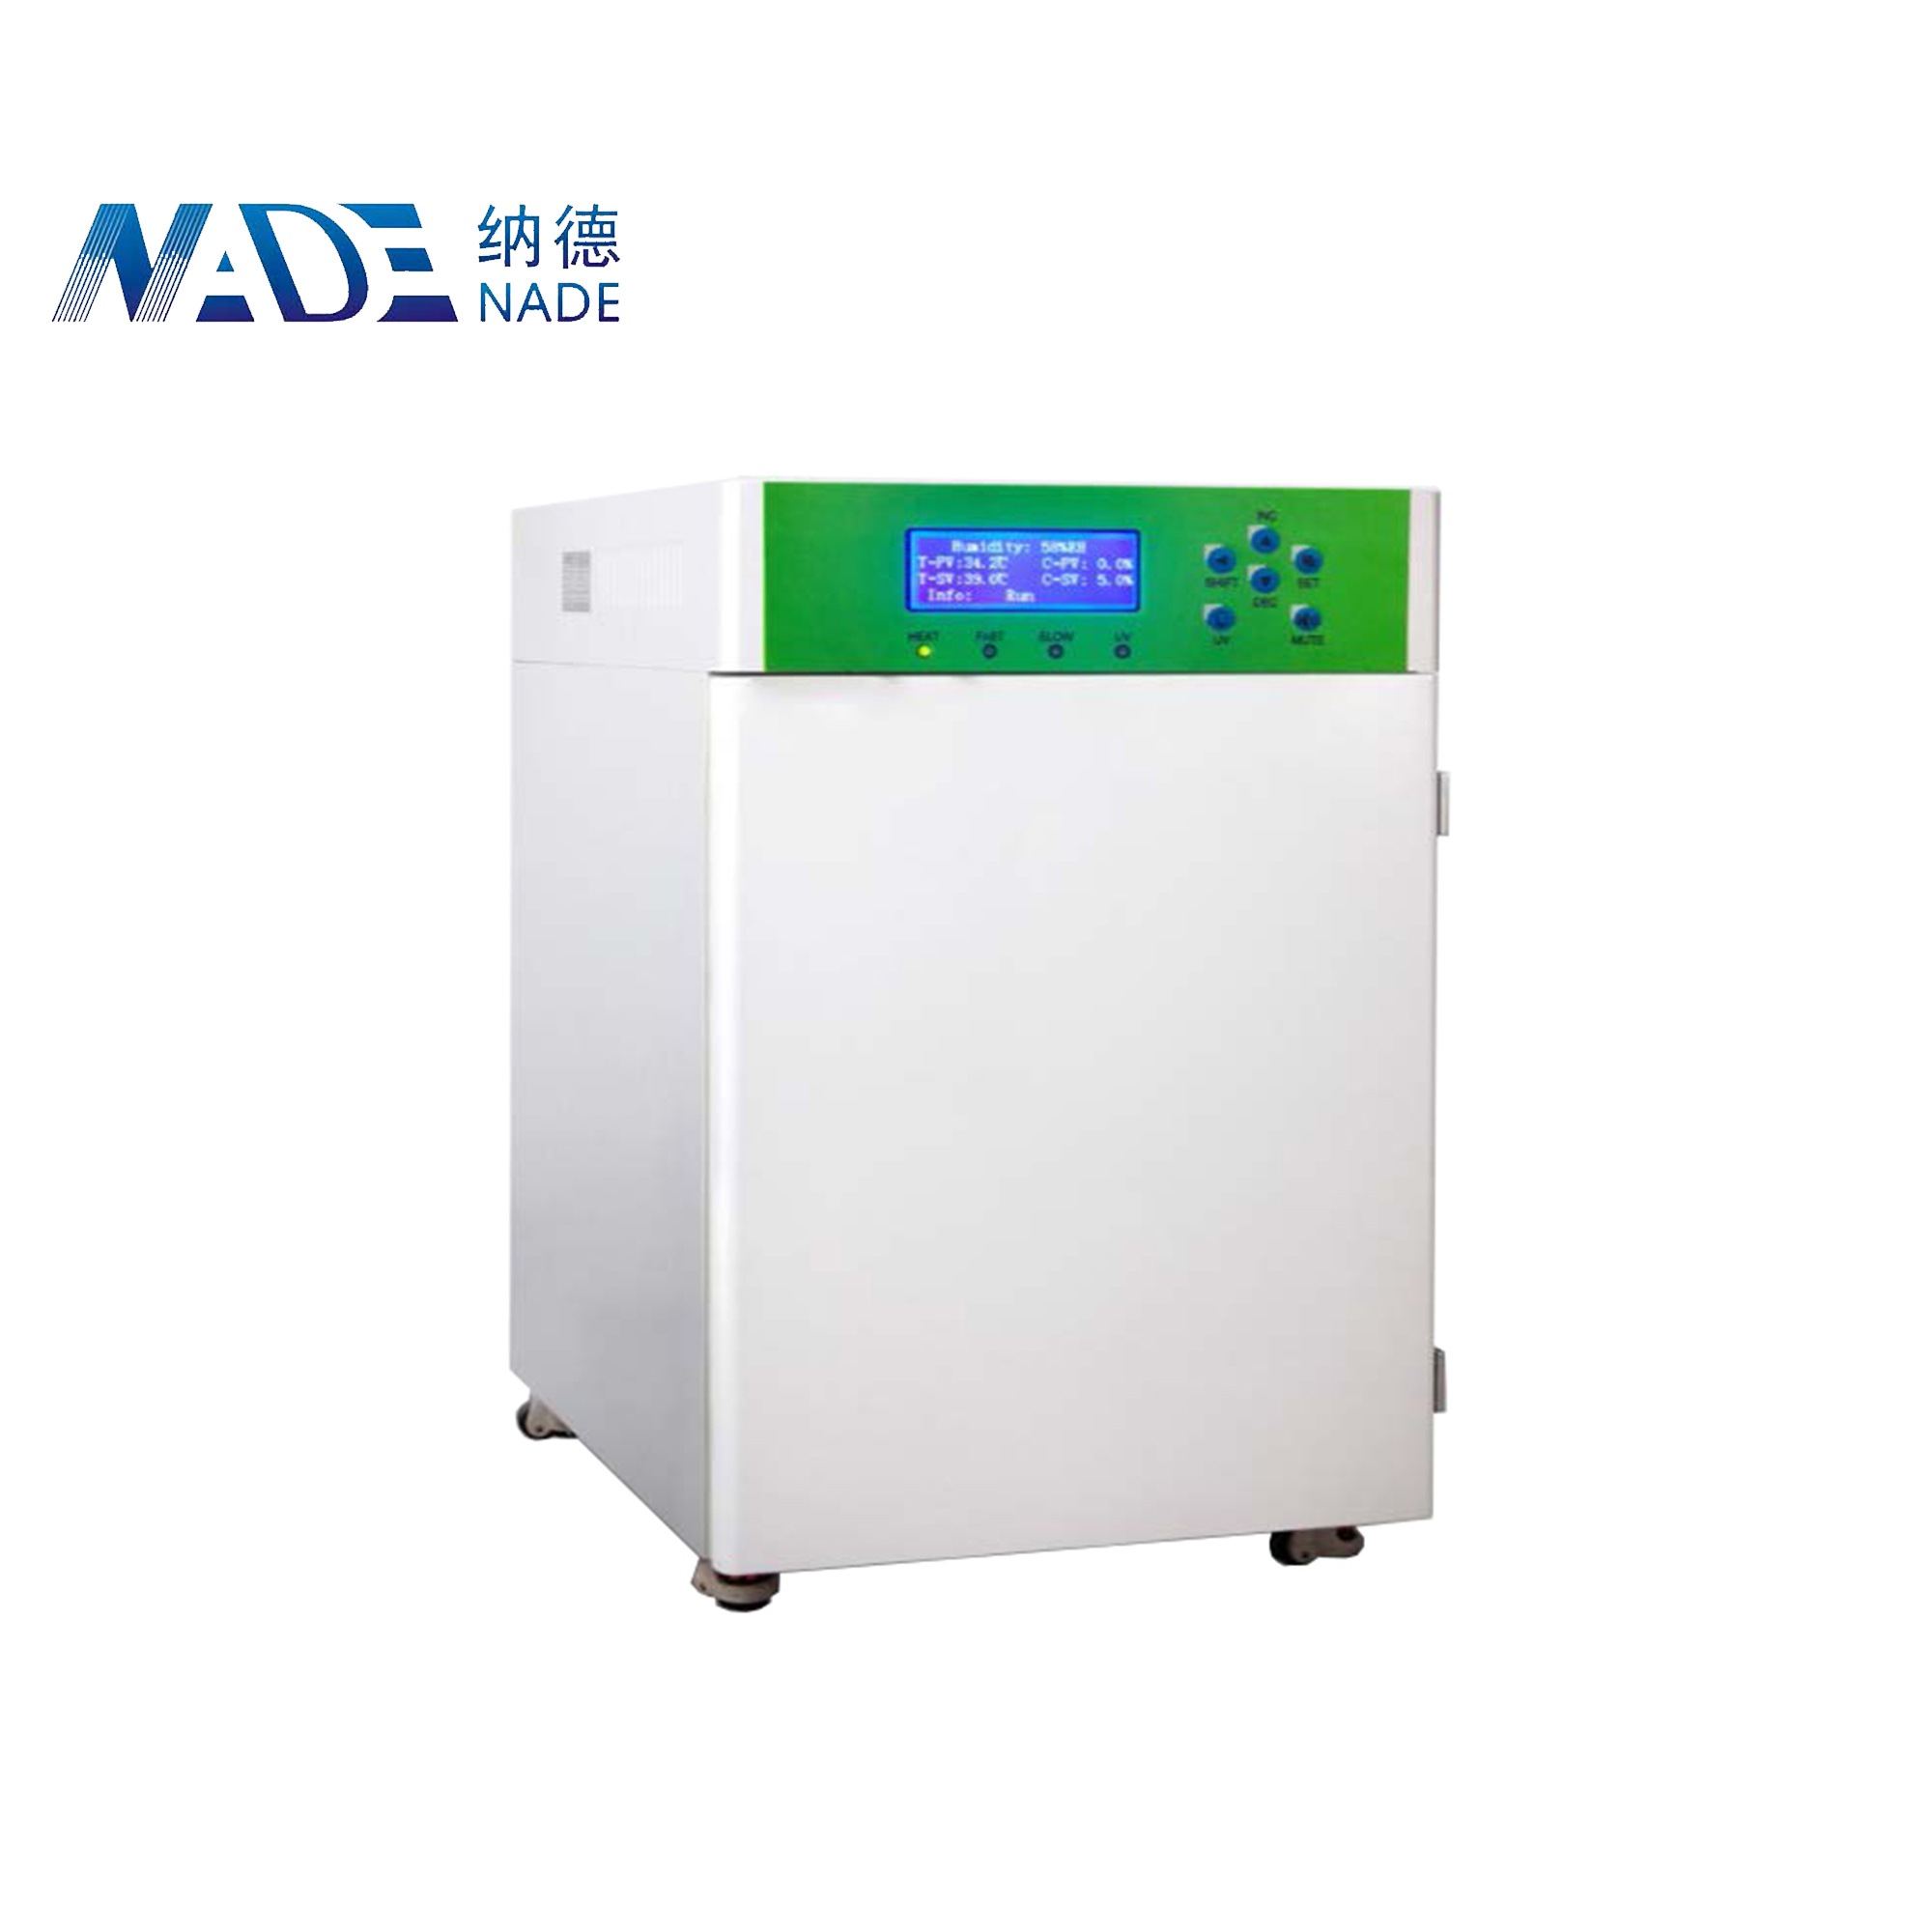 Nade Laboratory Thermostatic Air jacket/water jacket Thermostatic Co2 CELL Incubator NDWJ-3-160 160L